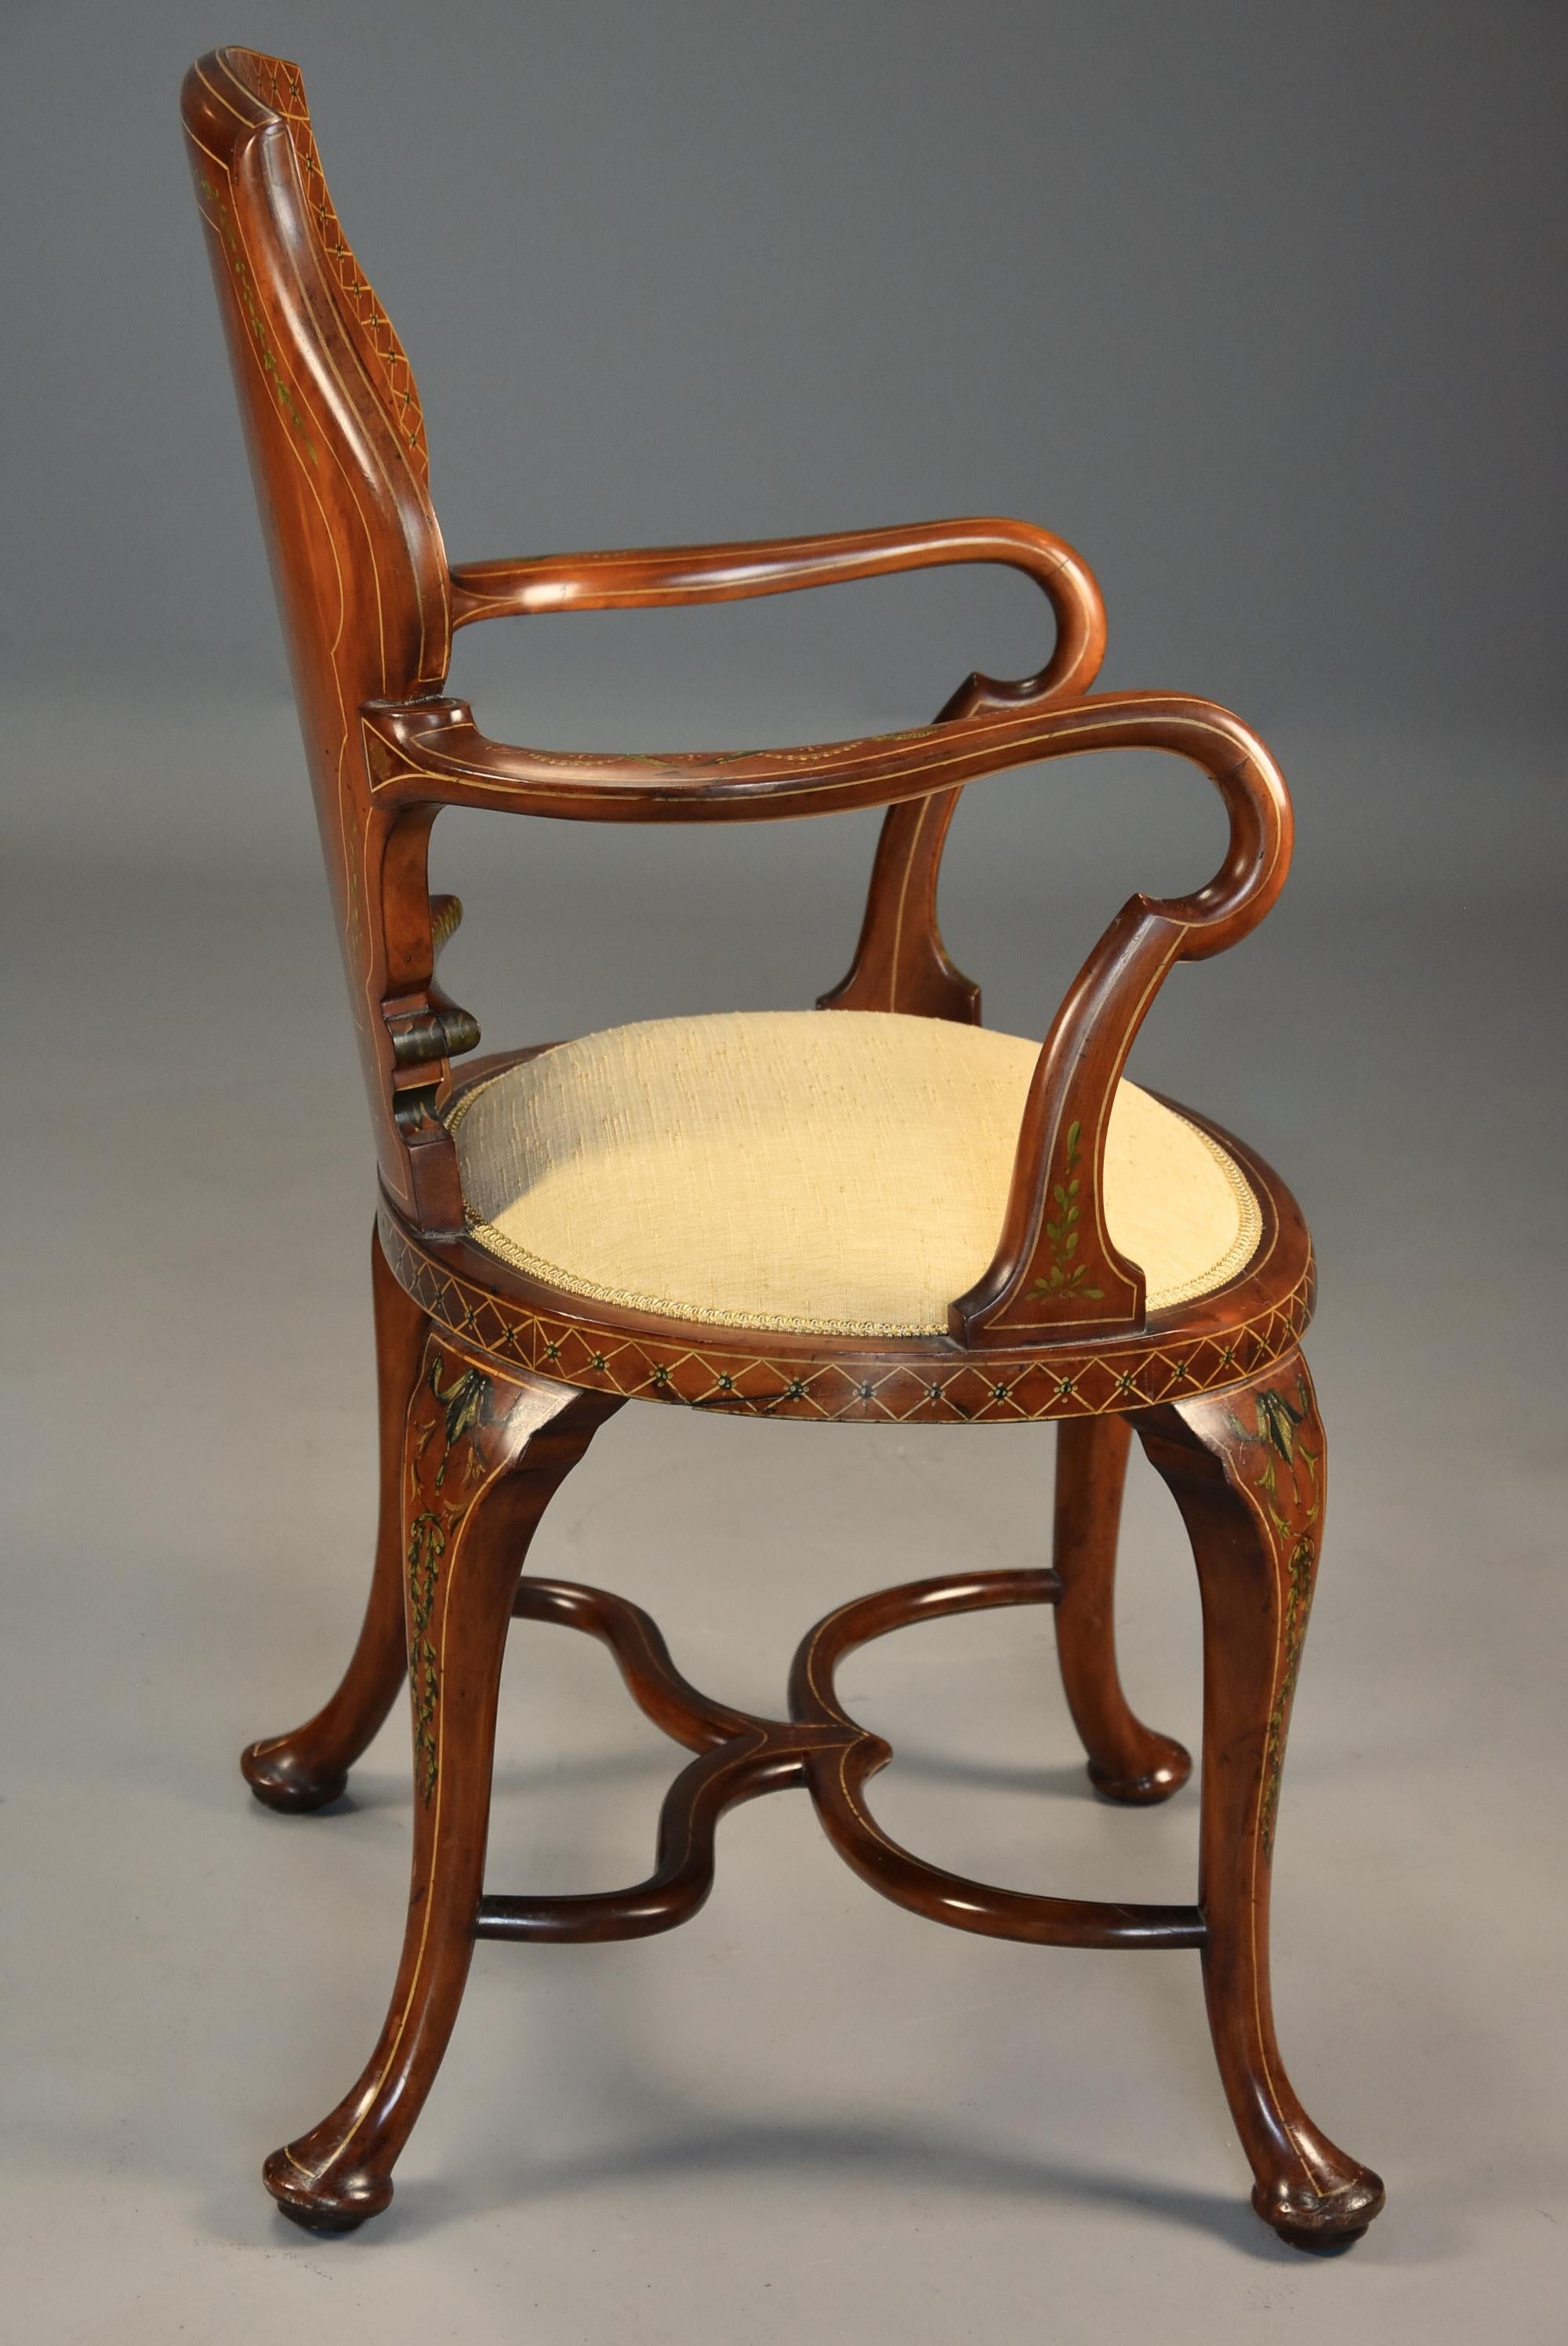 Highly Decorative Edwardian Satinwood and Painted Armchair in the Georgian Style im Angebot 3